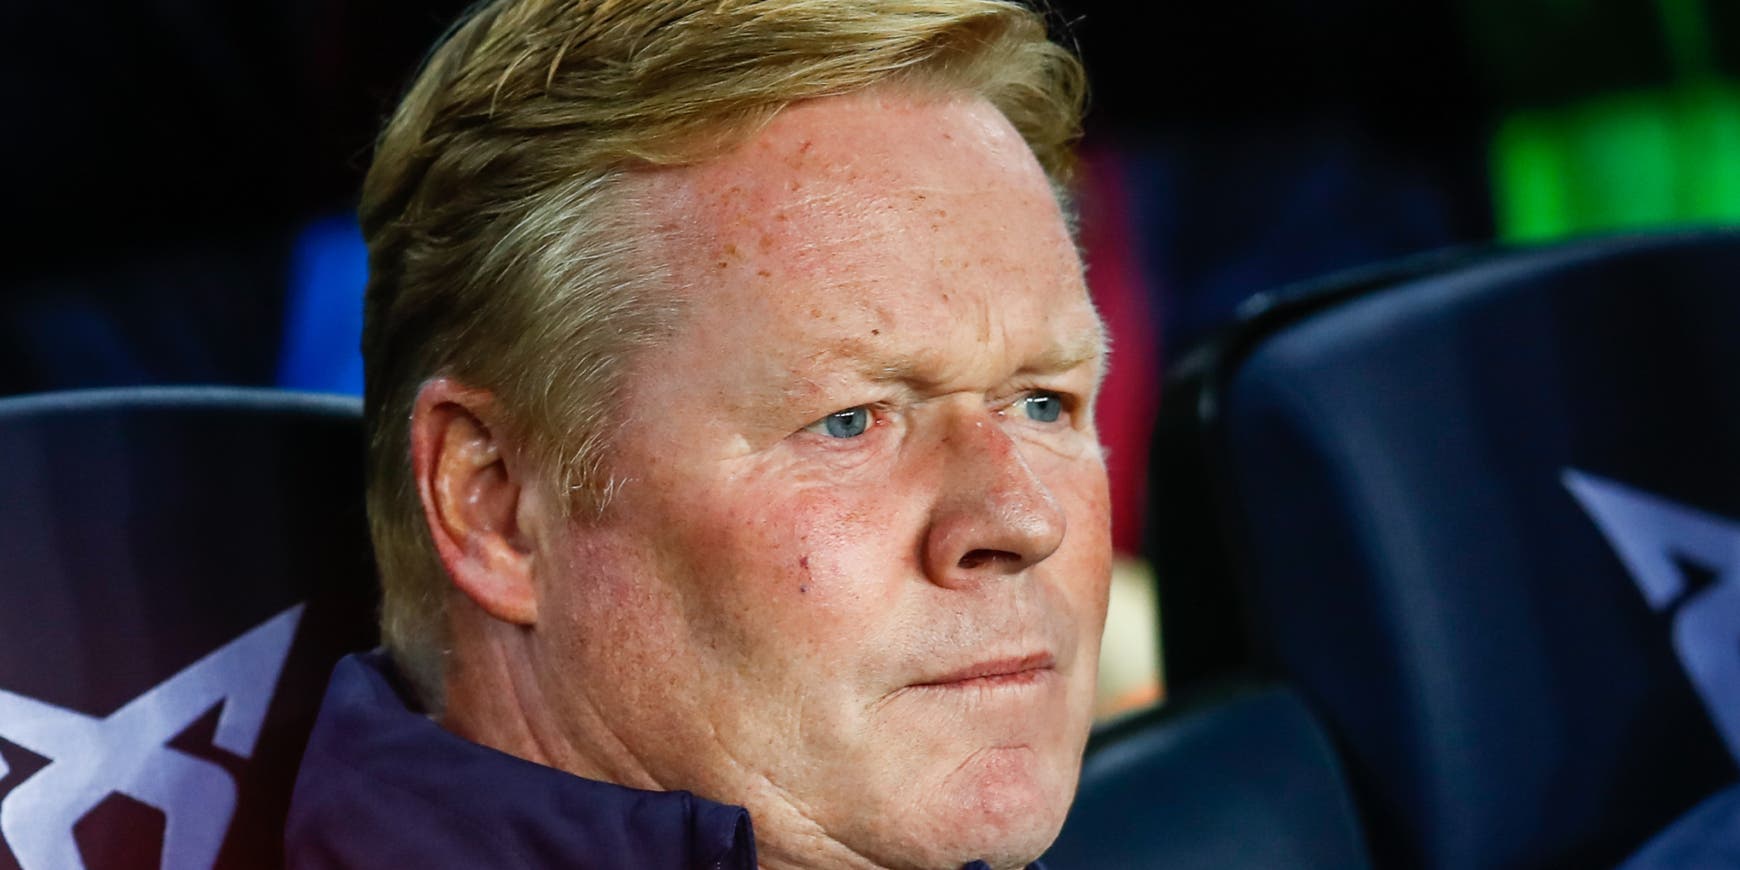 Koeman's historical ridicule when talking about the signings of FC Barcelona
	
